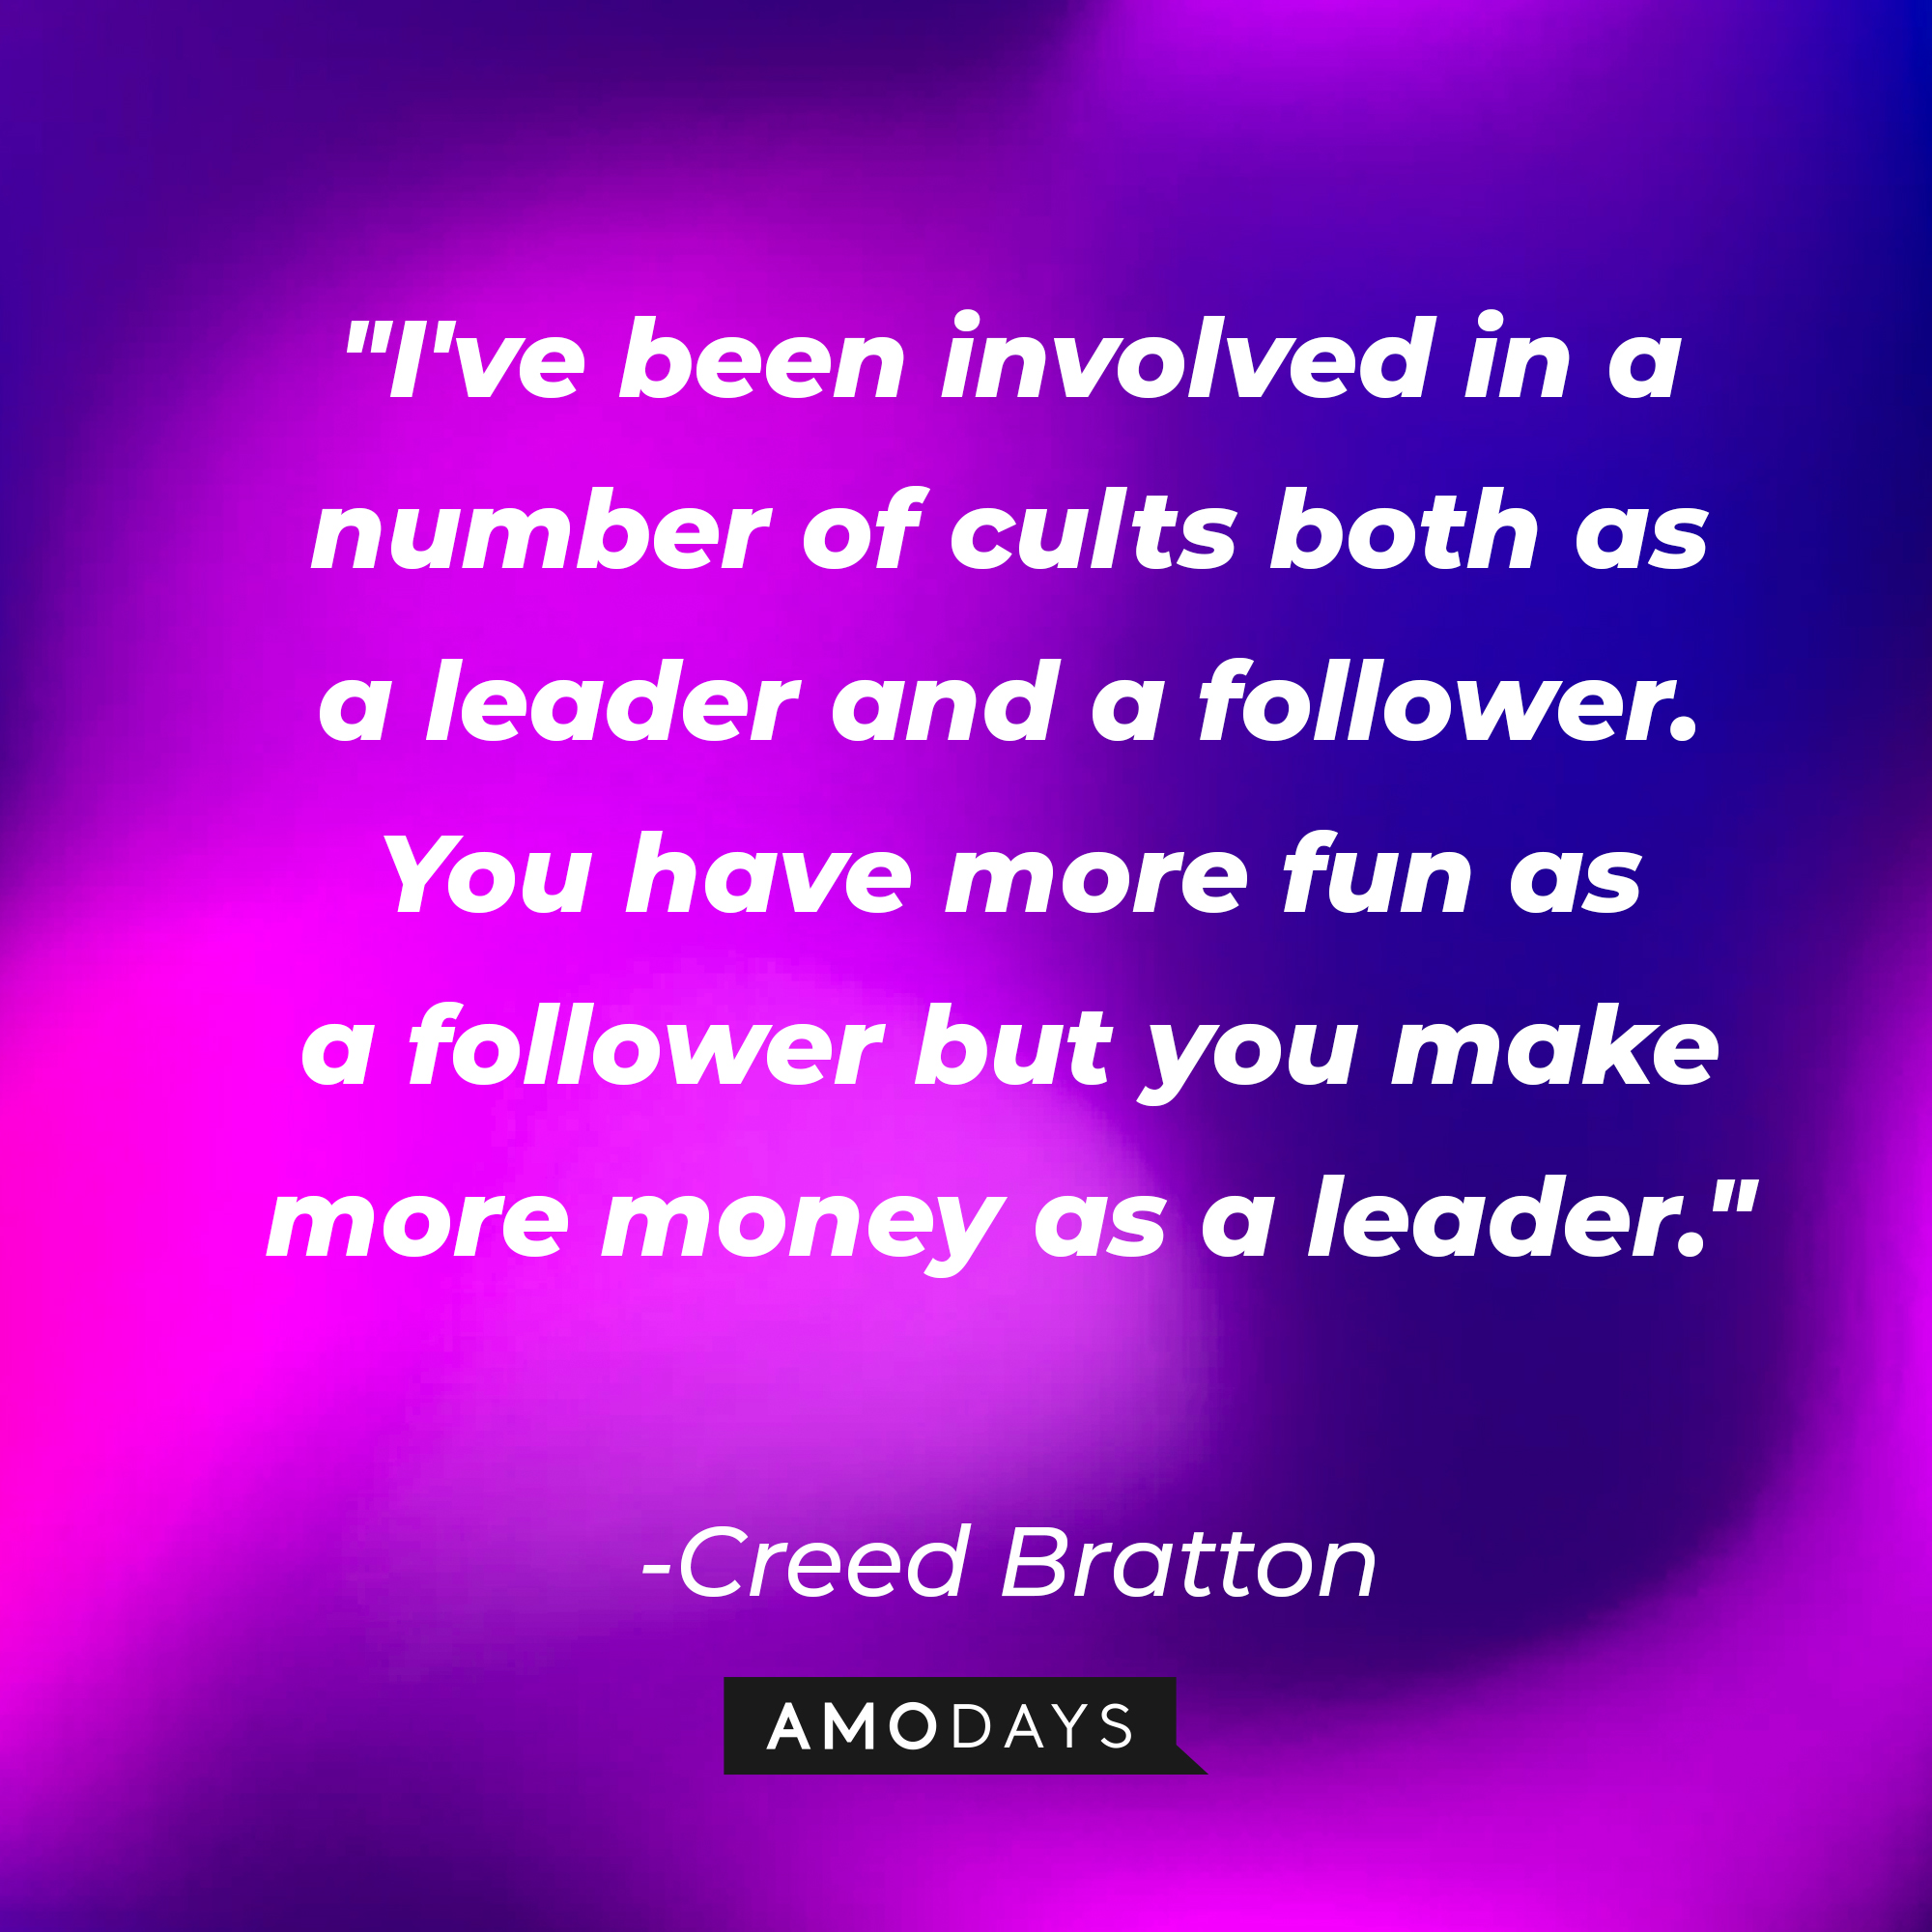 Creed Bratton's quote: "I've been involved in a number of cults both as a leader and a follower. You have more fun as a follower but you make more money as a leader." | Source: AmoDays